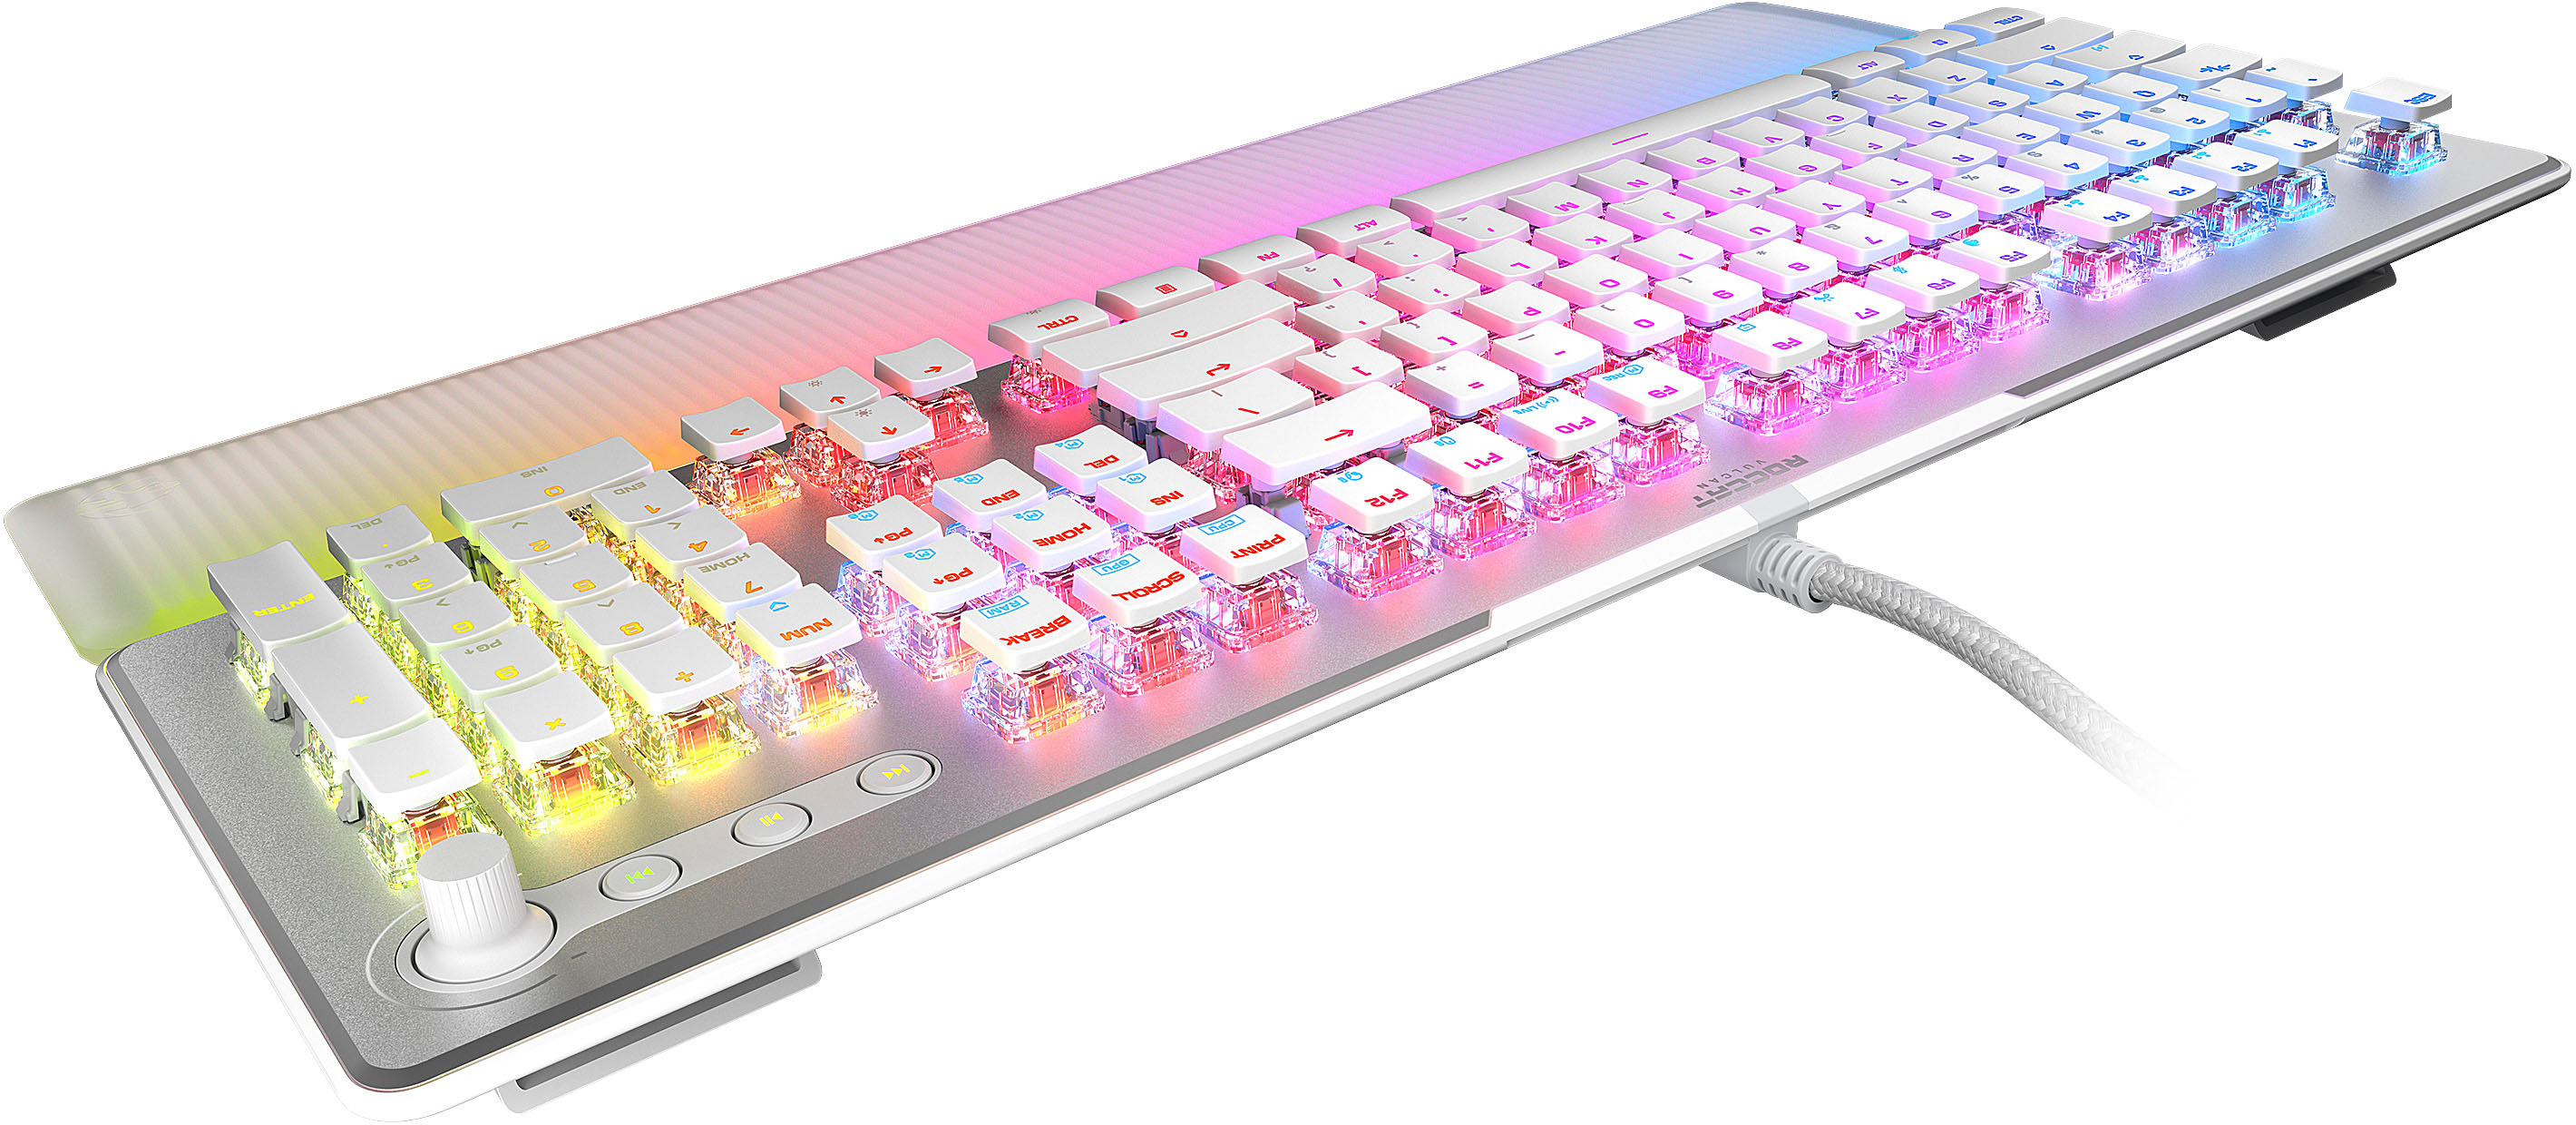 Vulcan II Gaming Keyboard With Mechanical Switches